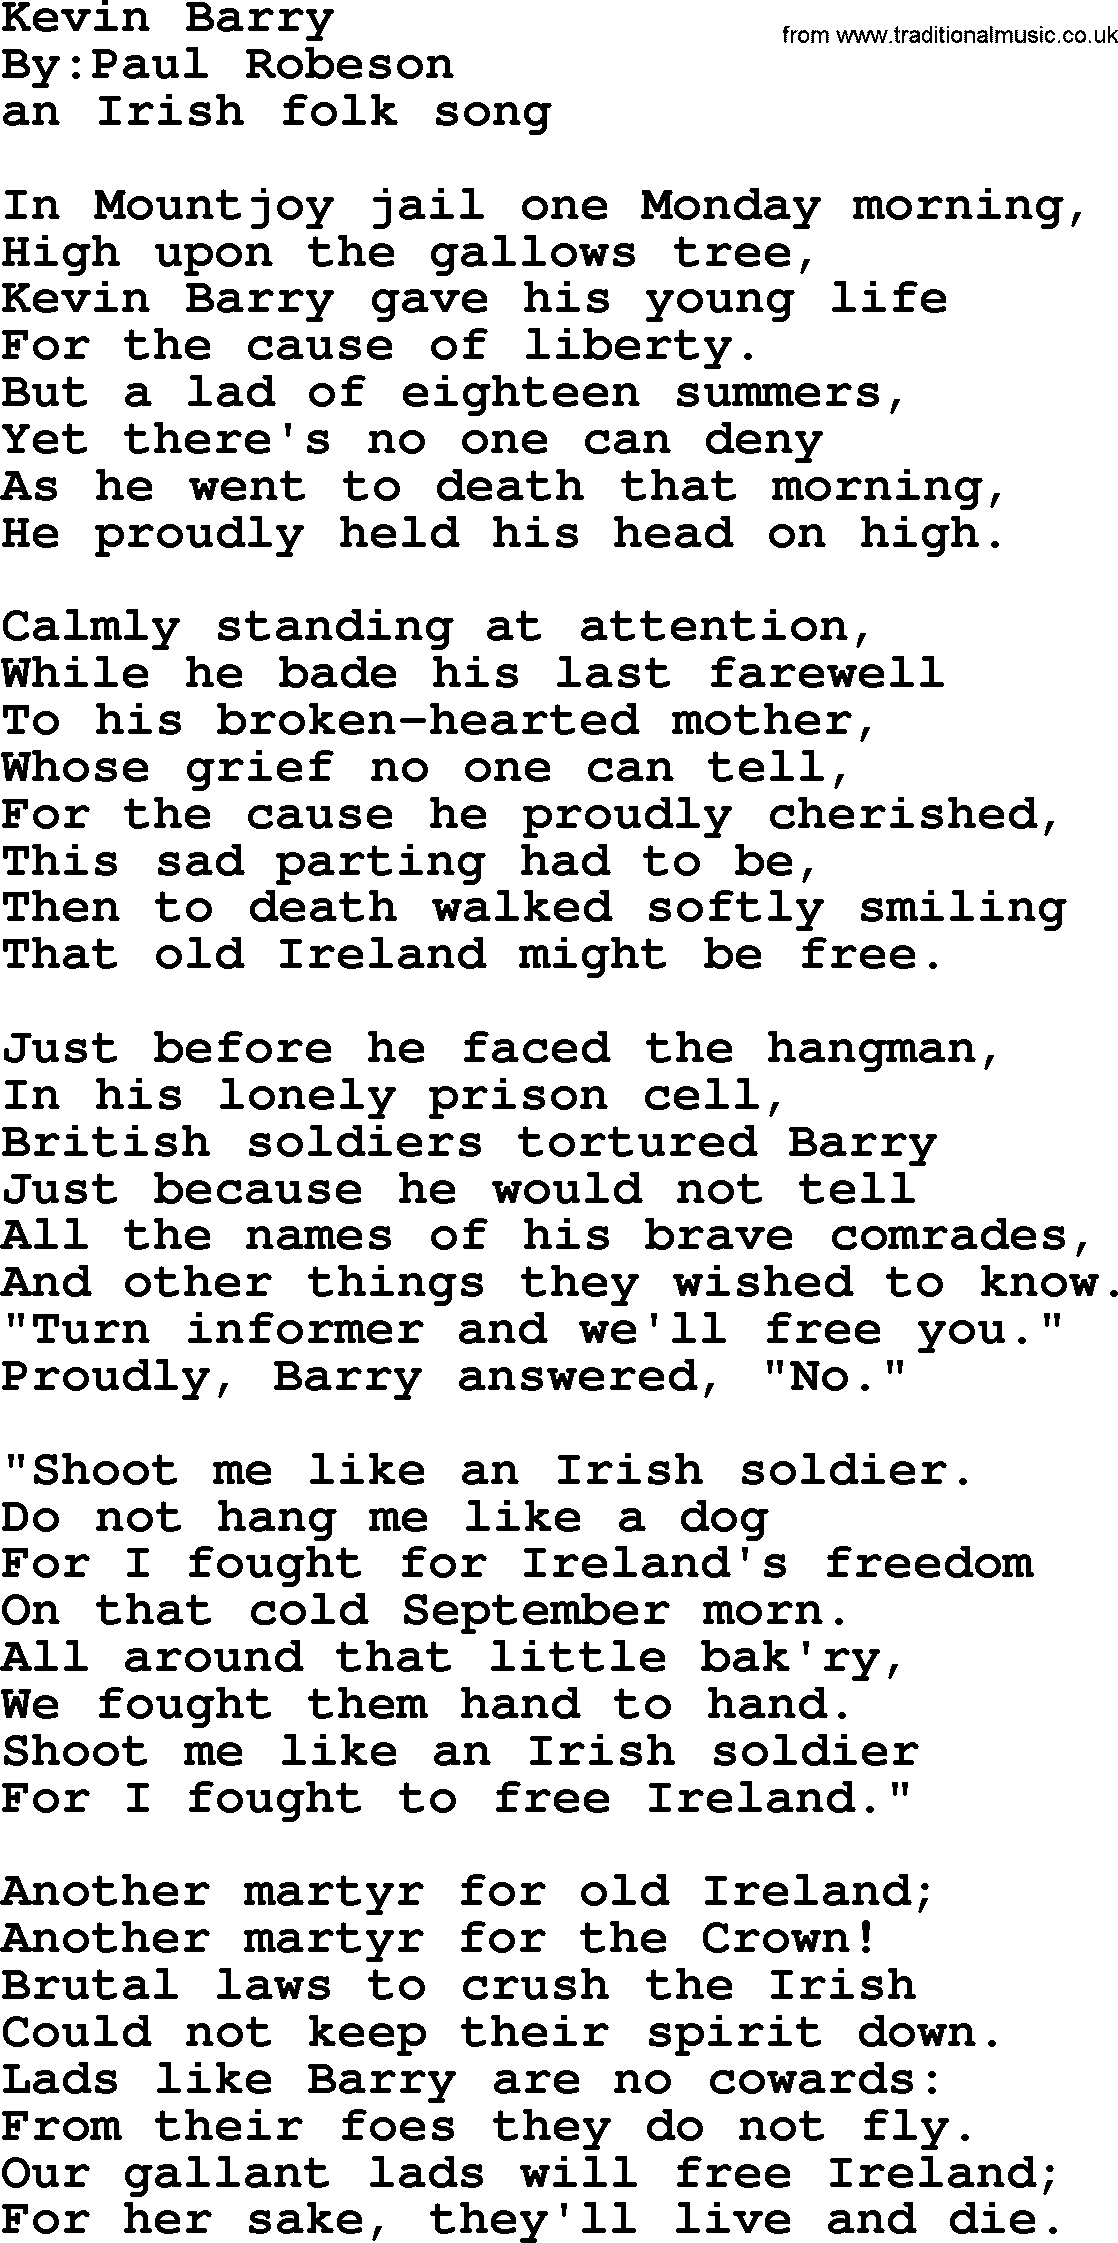 Political, Solidarity, Workers or Union song: Kevin Barry, lyrics